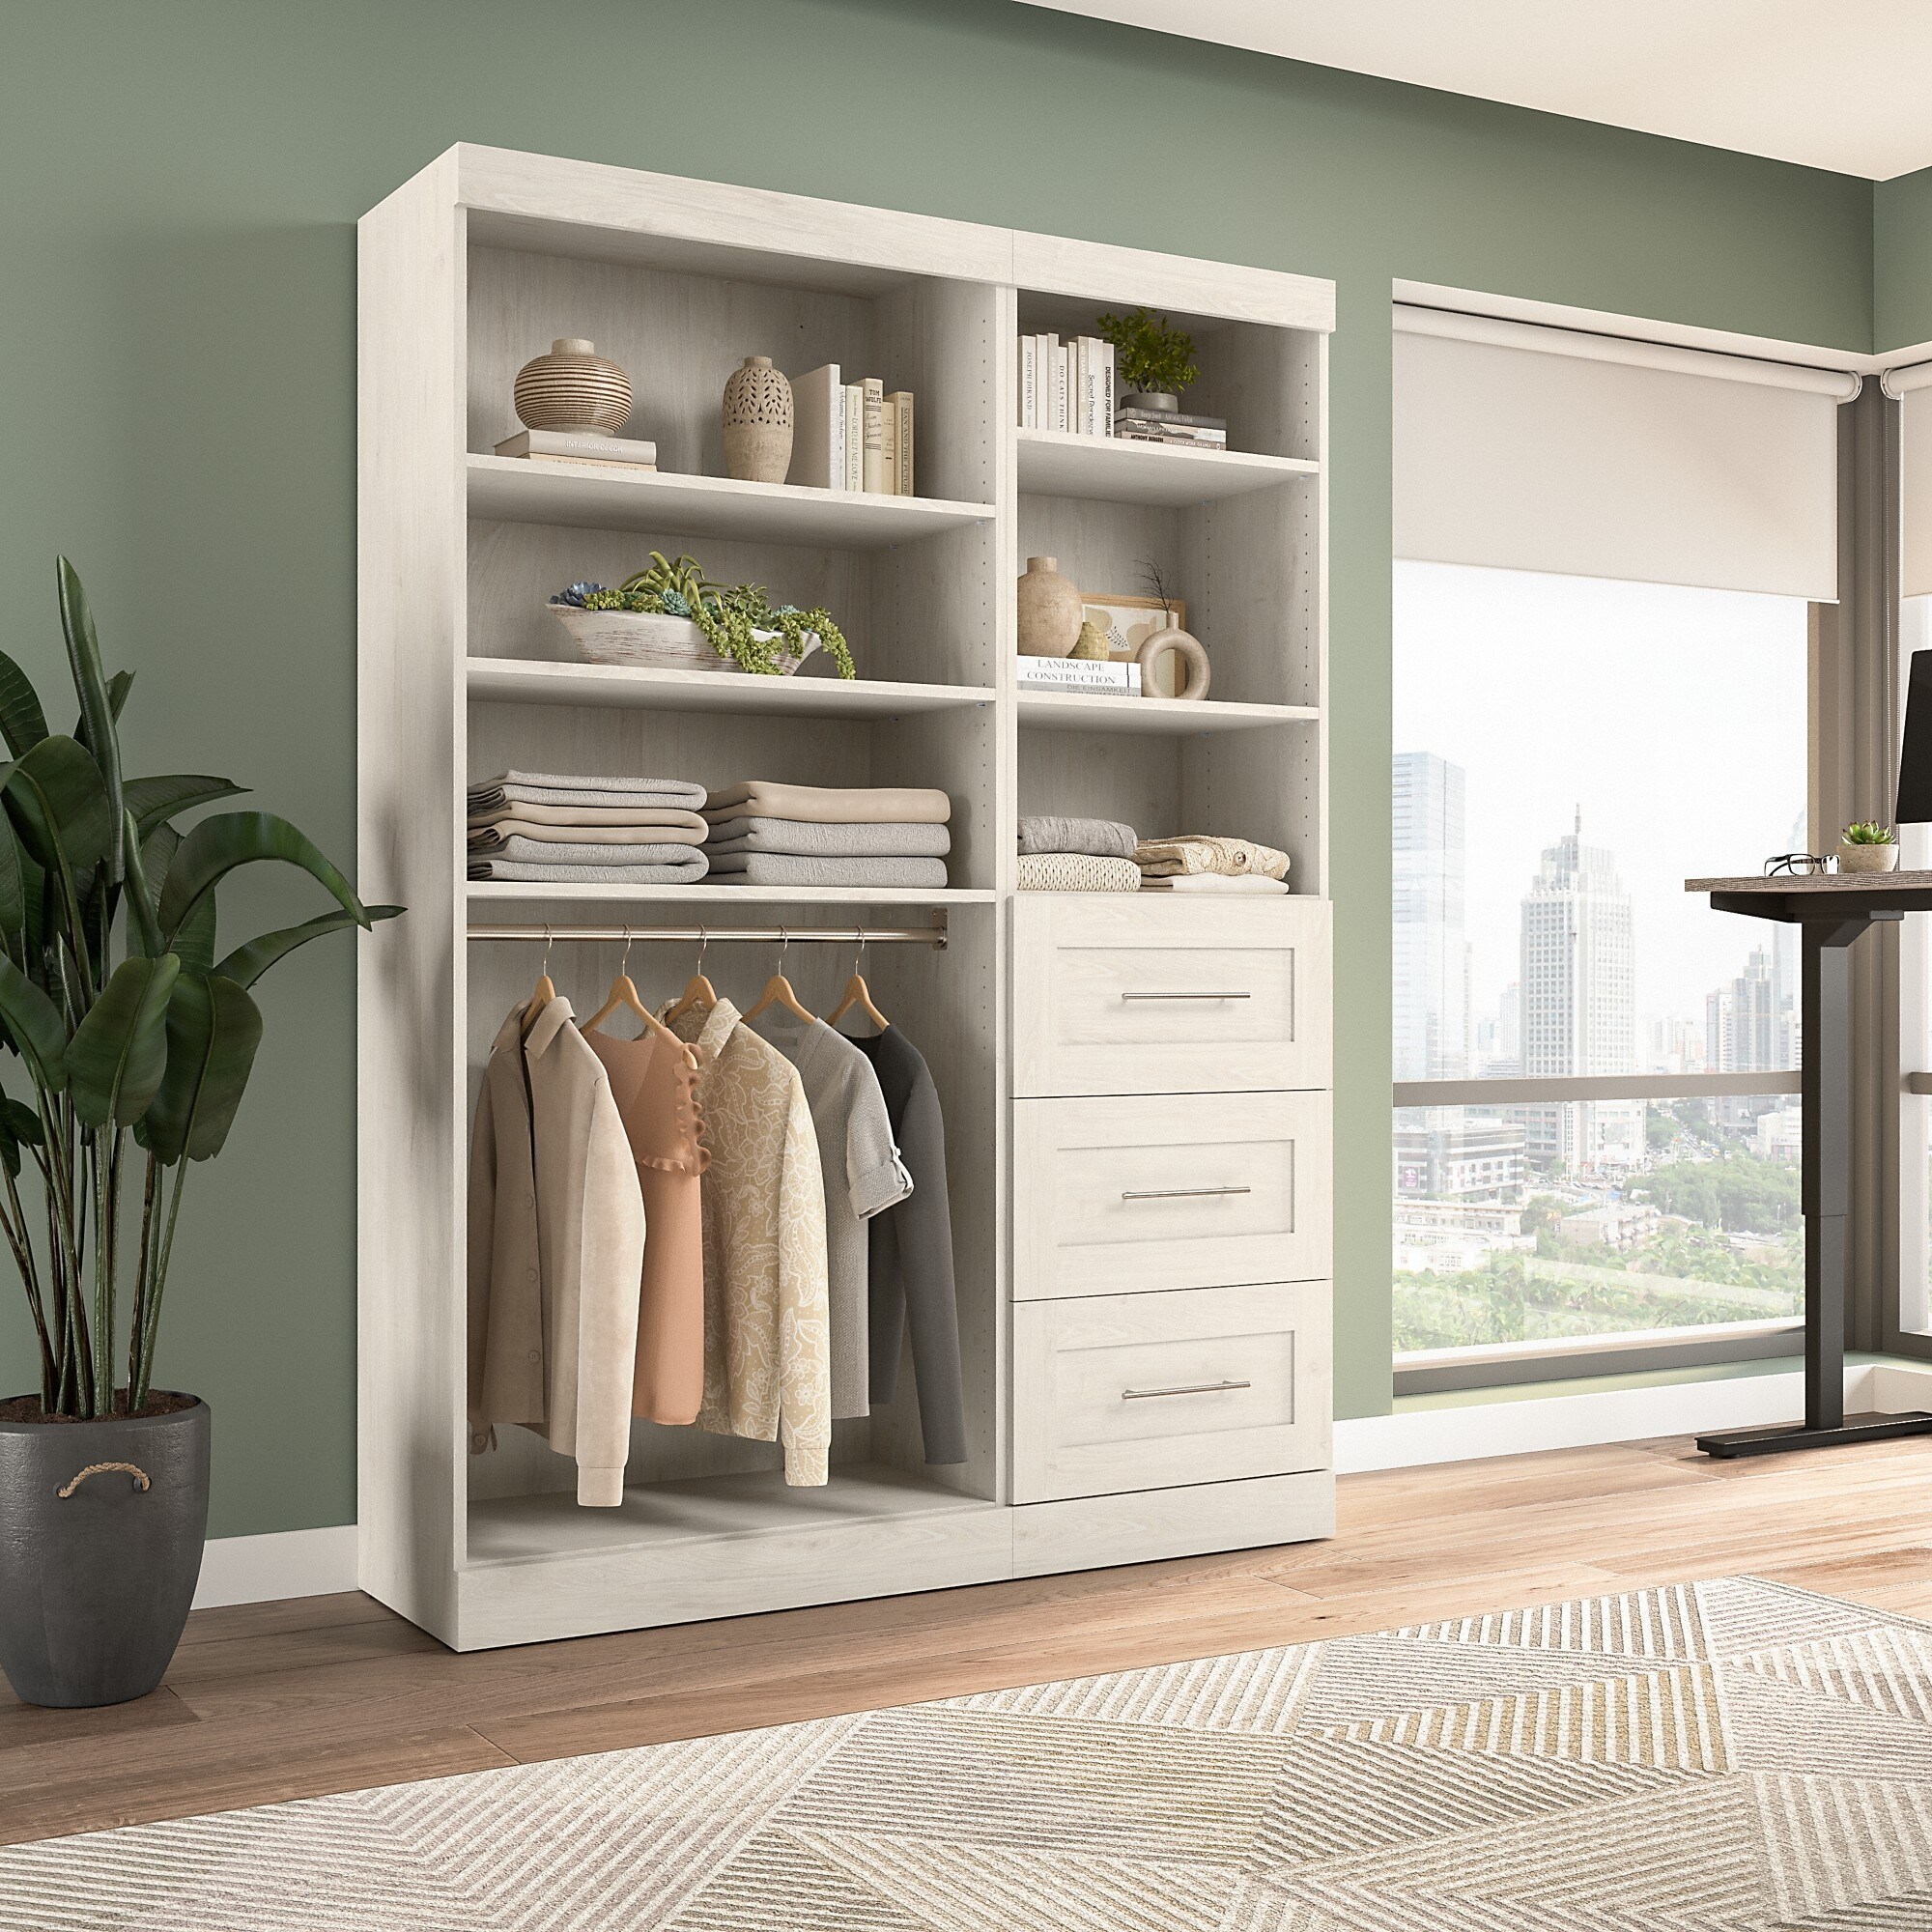 https://ak1.ostkcdn.com/images/products/is/images/direct/2c7151906003ed800ee3c8c432aa60d4964c62d6/Pur-61W-Closet-Organizer-System-by-Bestar.jpg